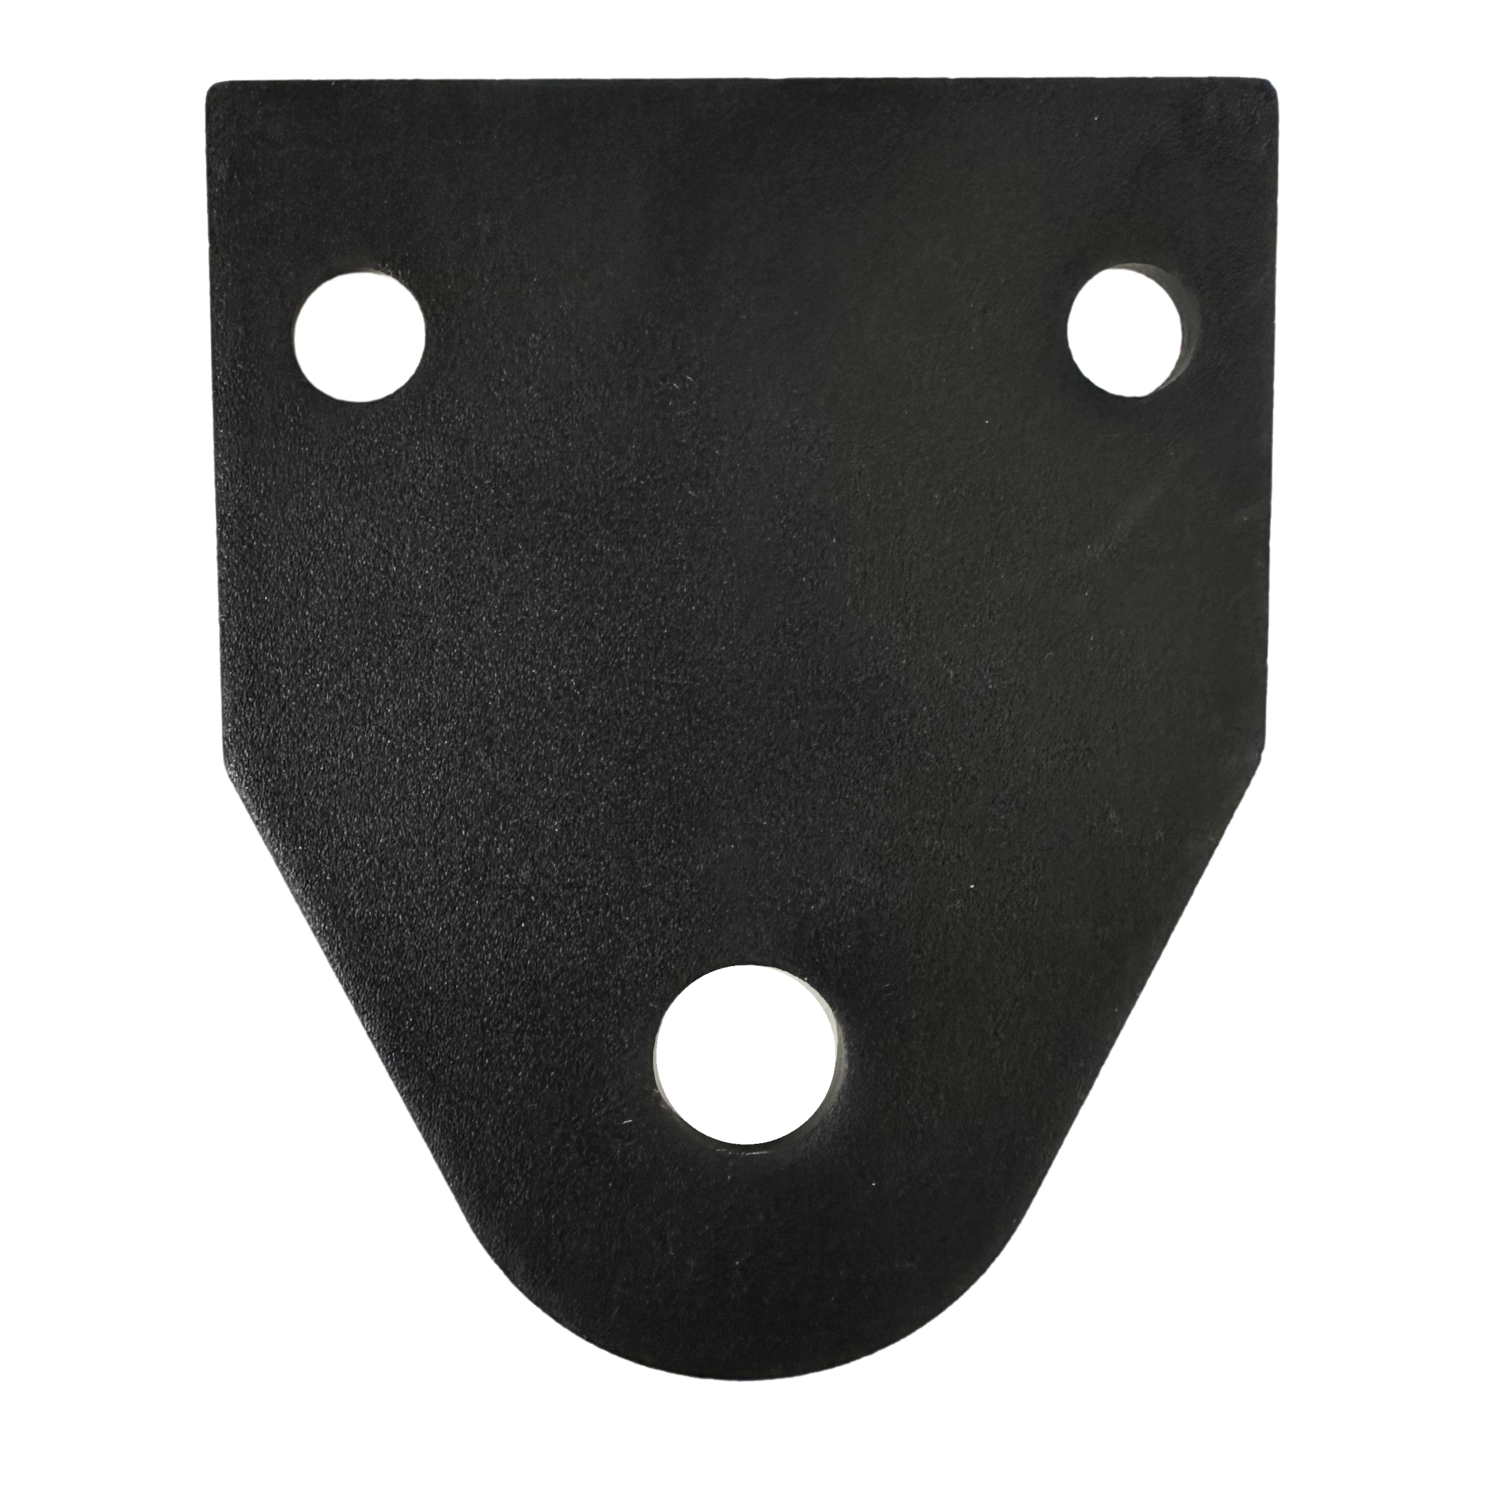 Vehicle Safety Flag (VSF) mounting plate with durable construction, providing a stable base for attaching safety flags to vehicles.